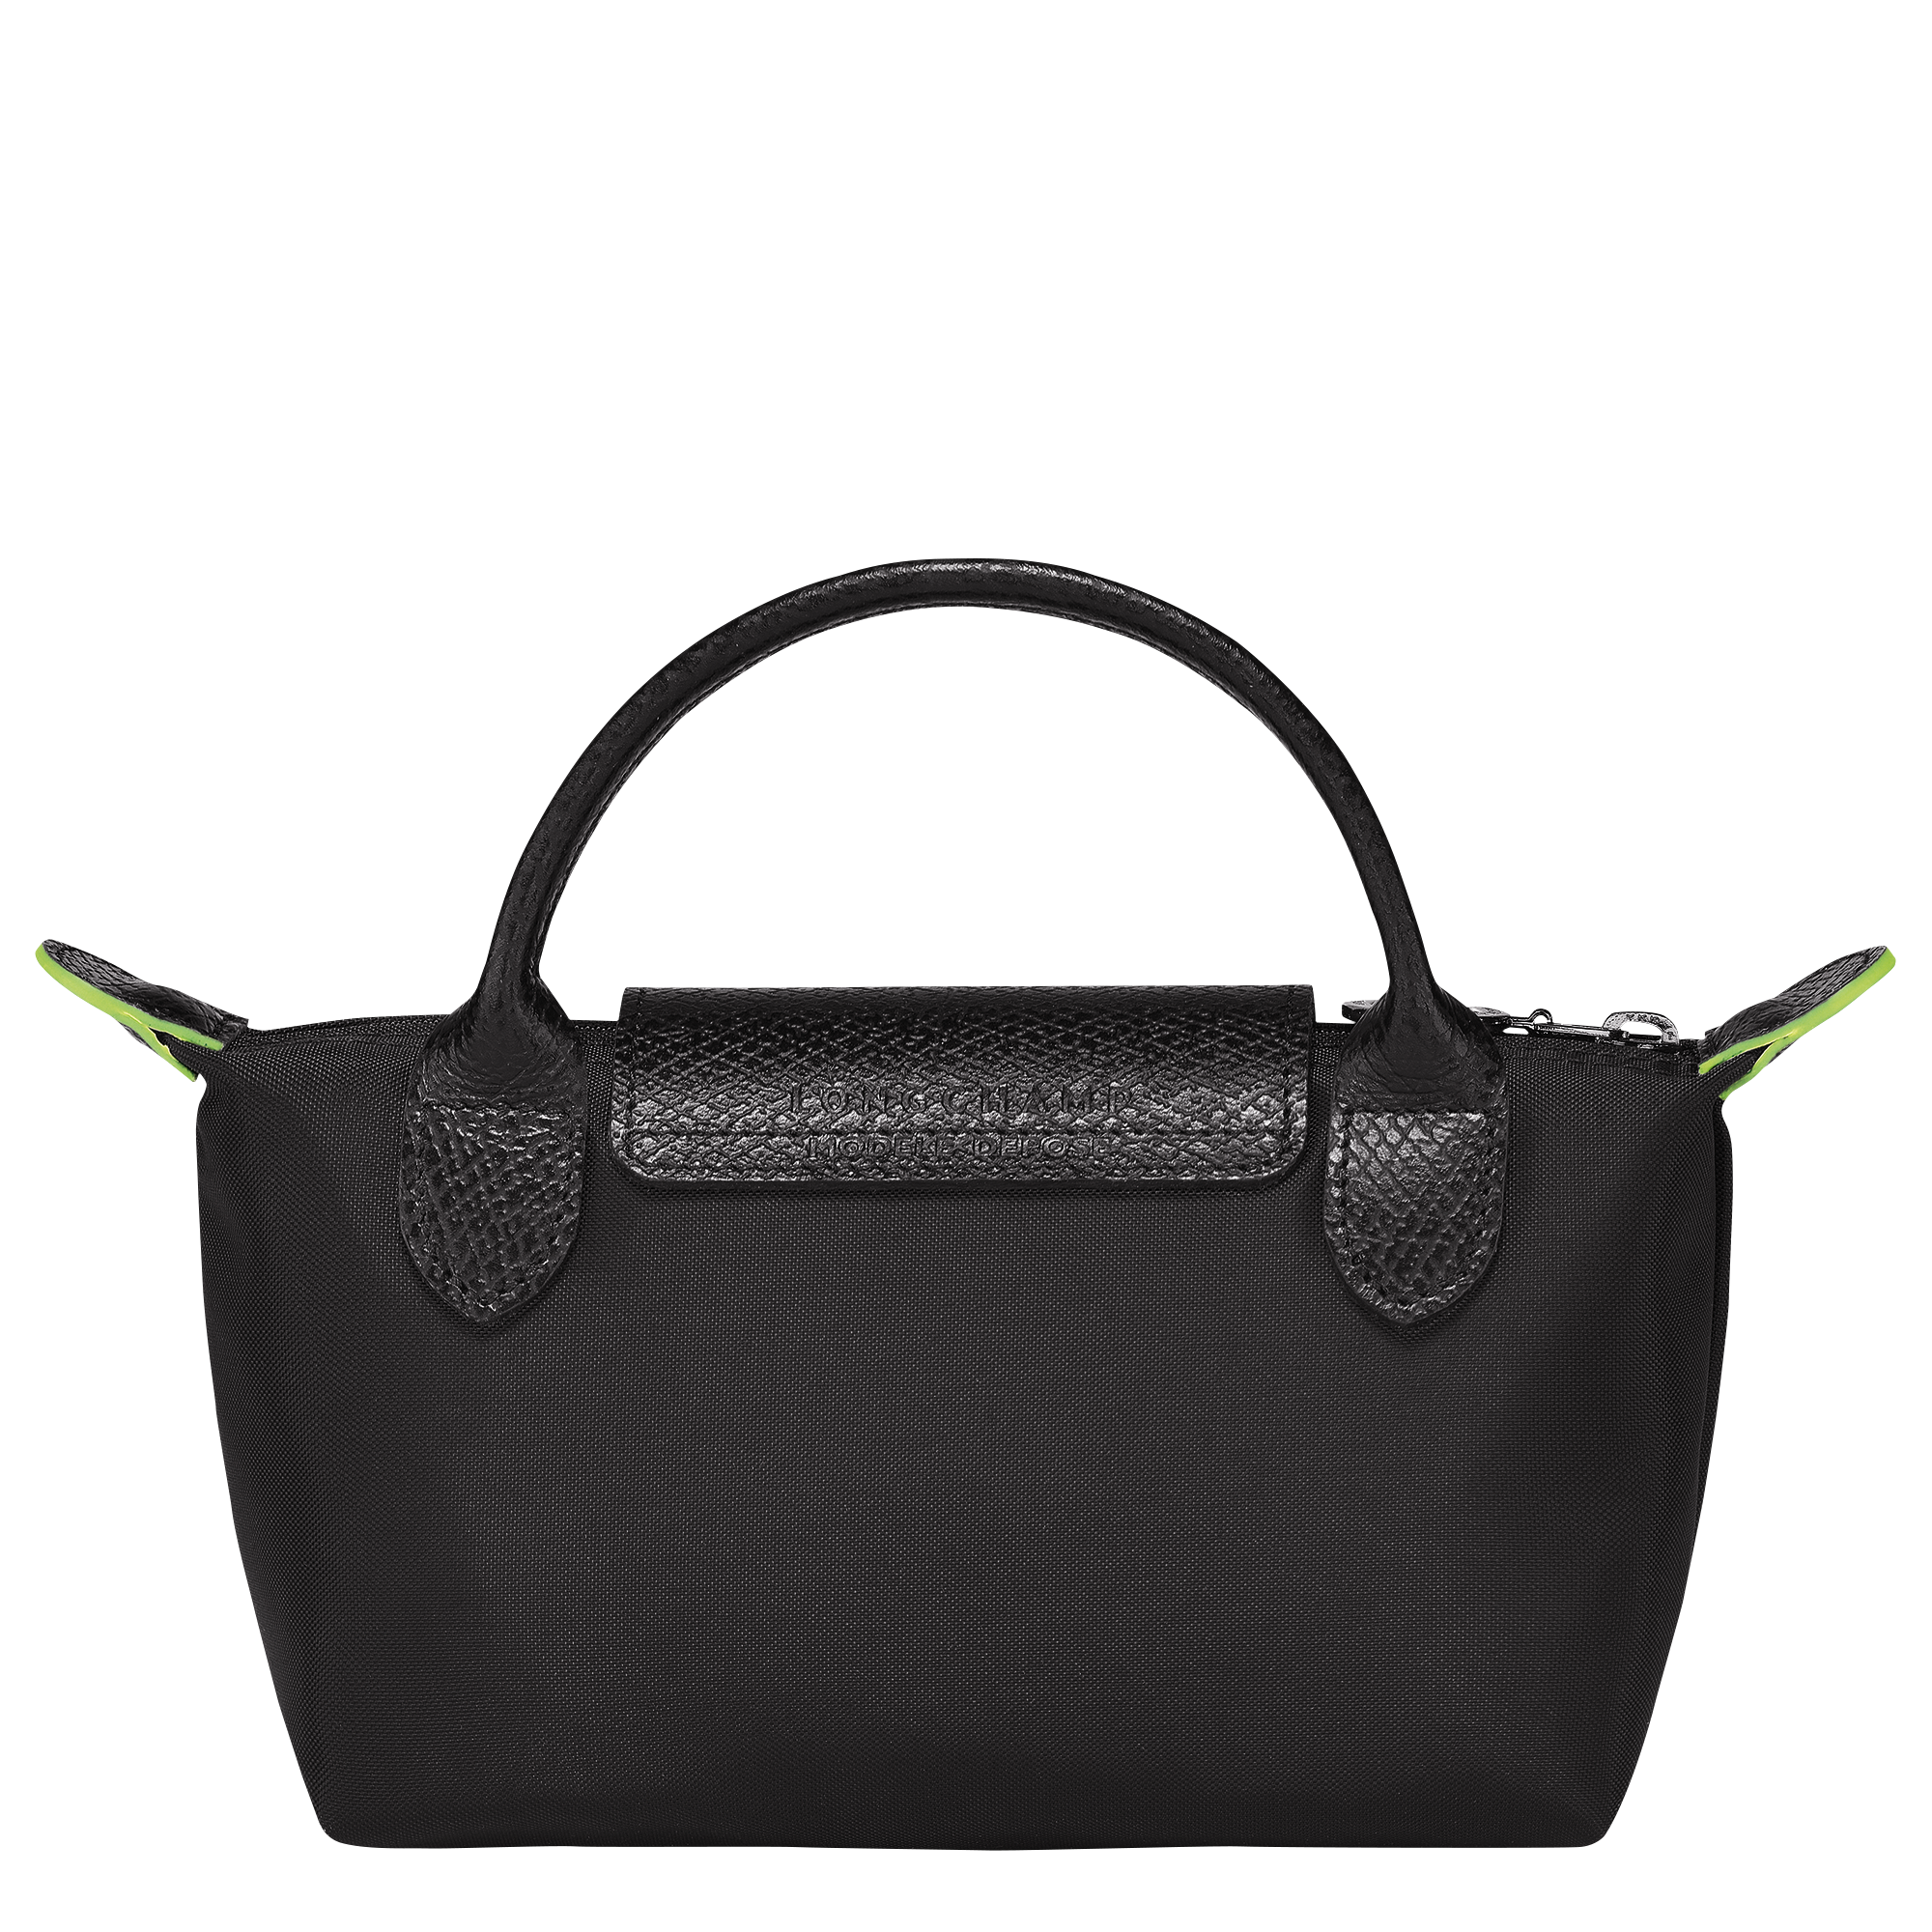 Le Pliage Green Pouch with handle, Black